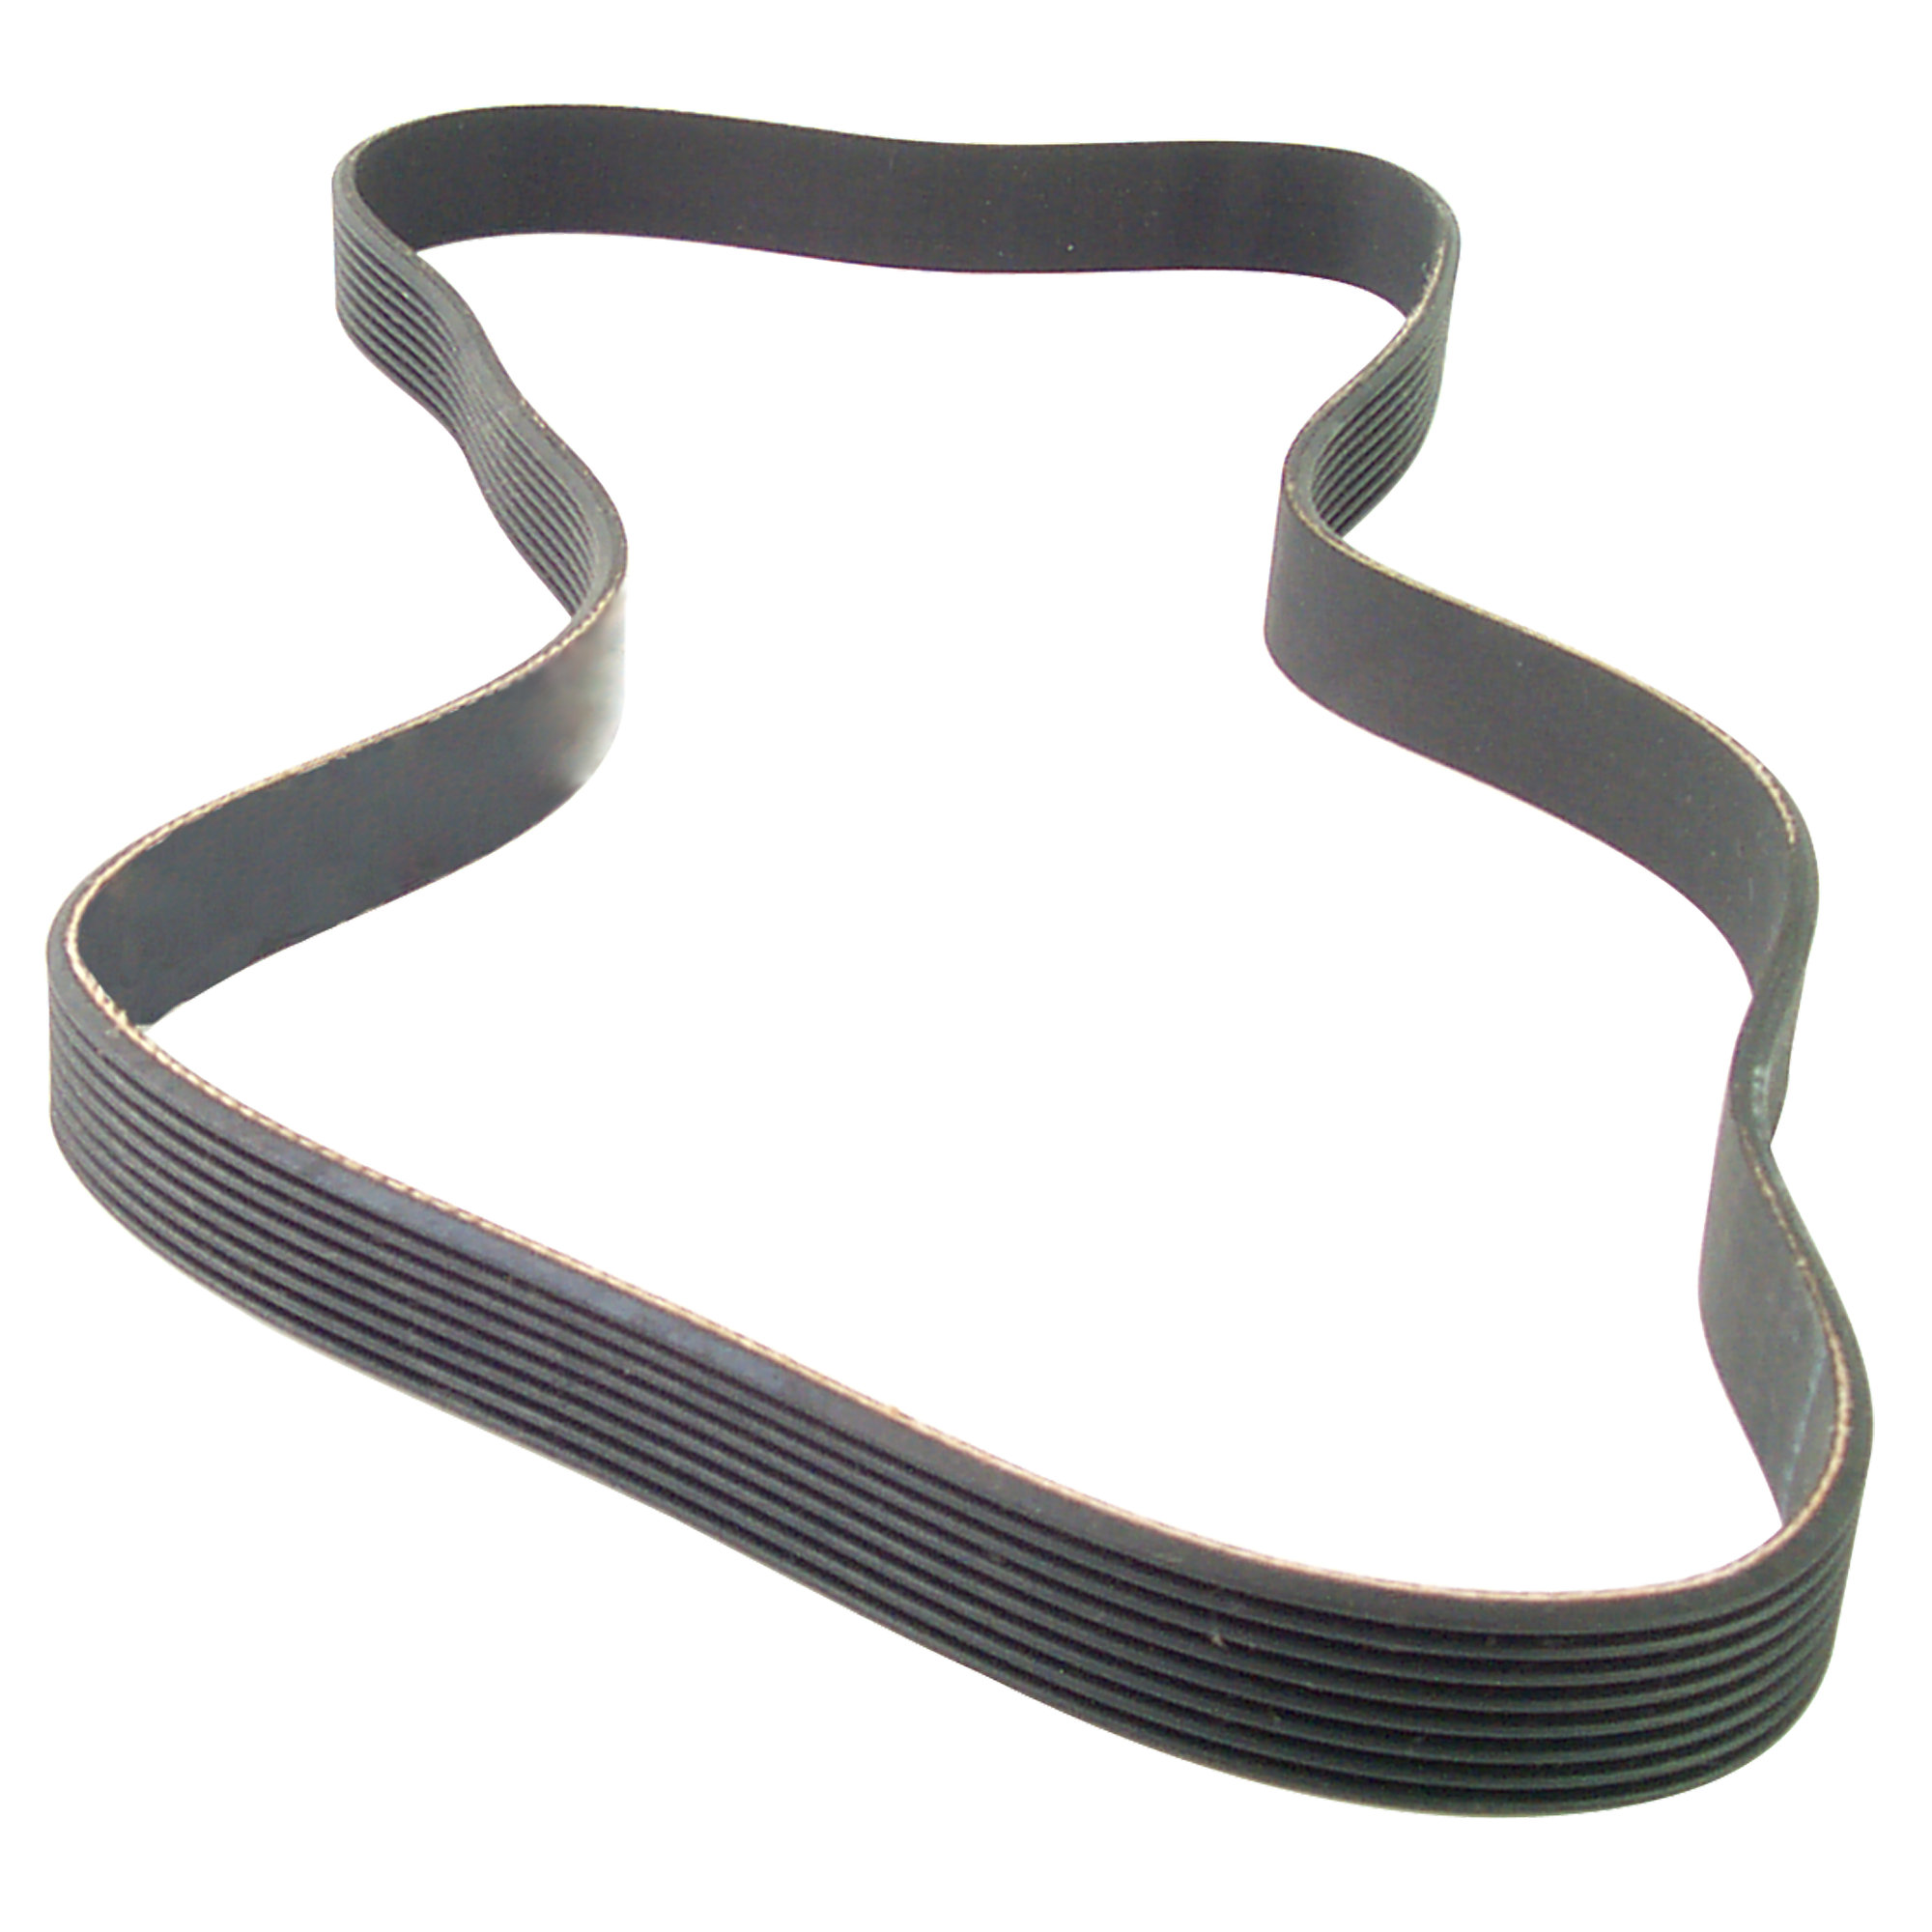 Drive Belt fits some Precor Machines, PPP000000010217130